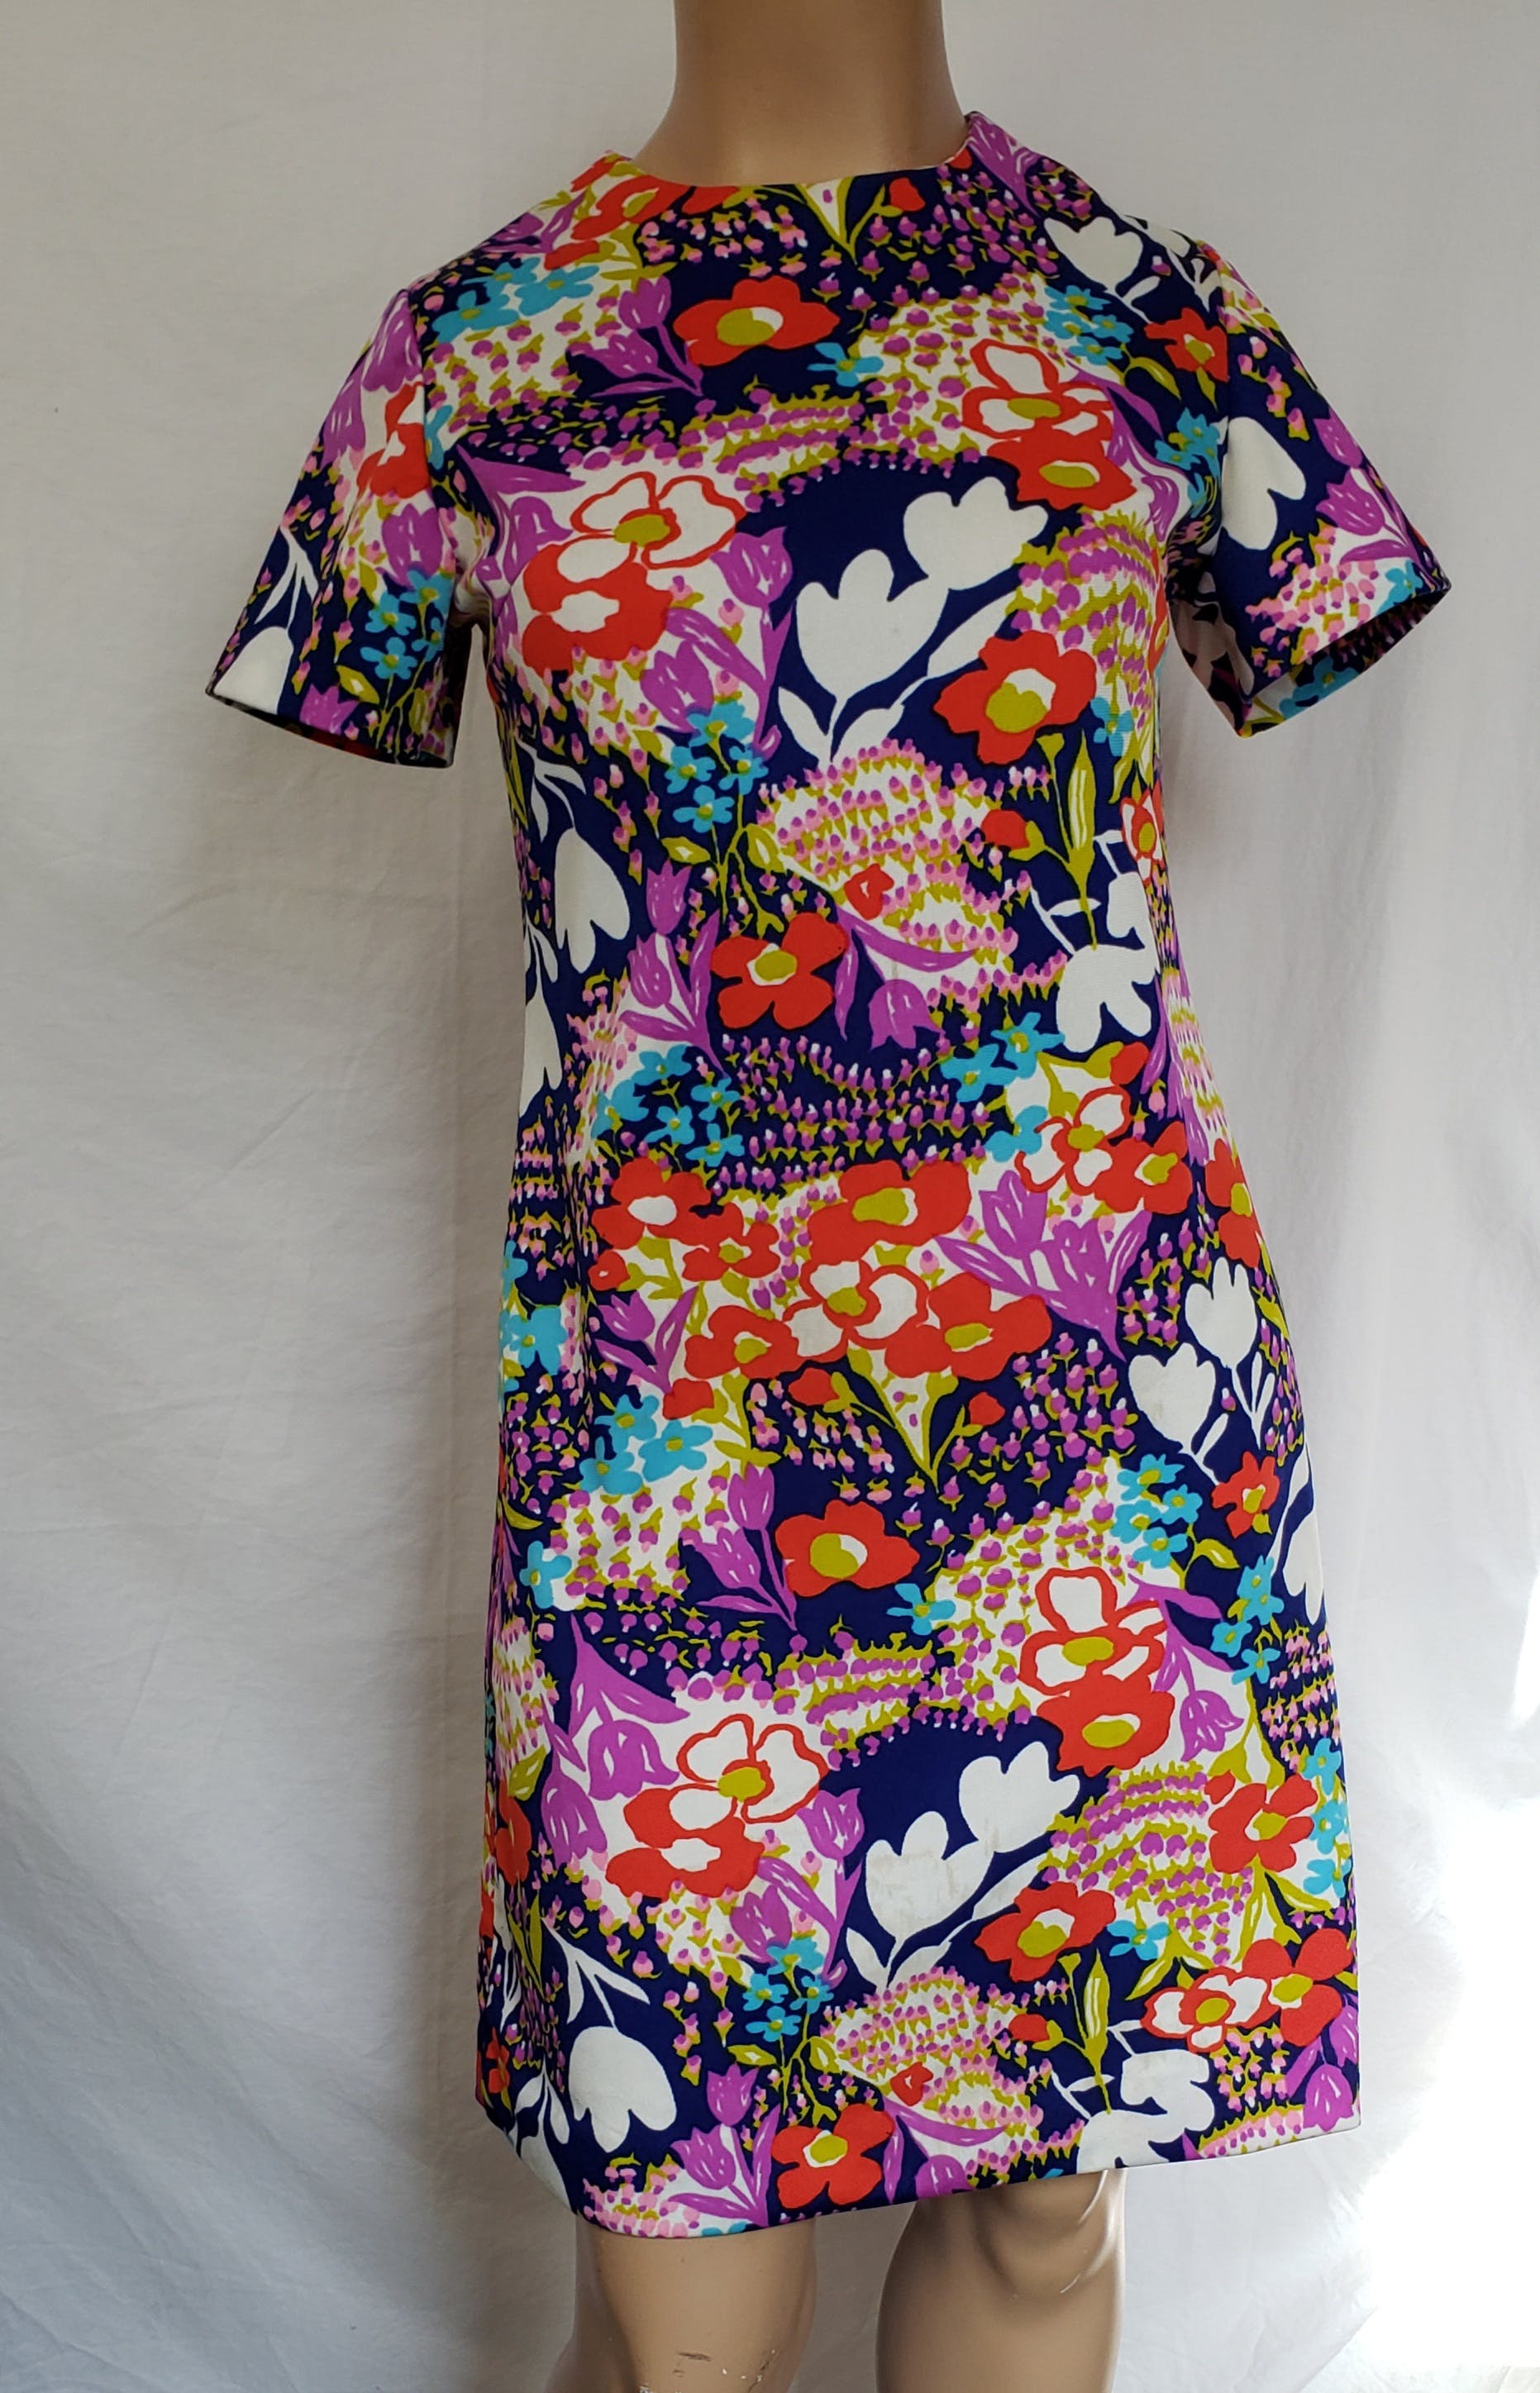 Vintage 60's Floral Print Shift Dress by Pretty Penny | Shop THRILLING